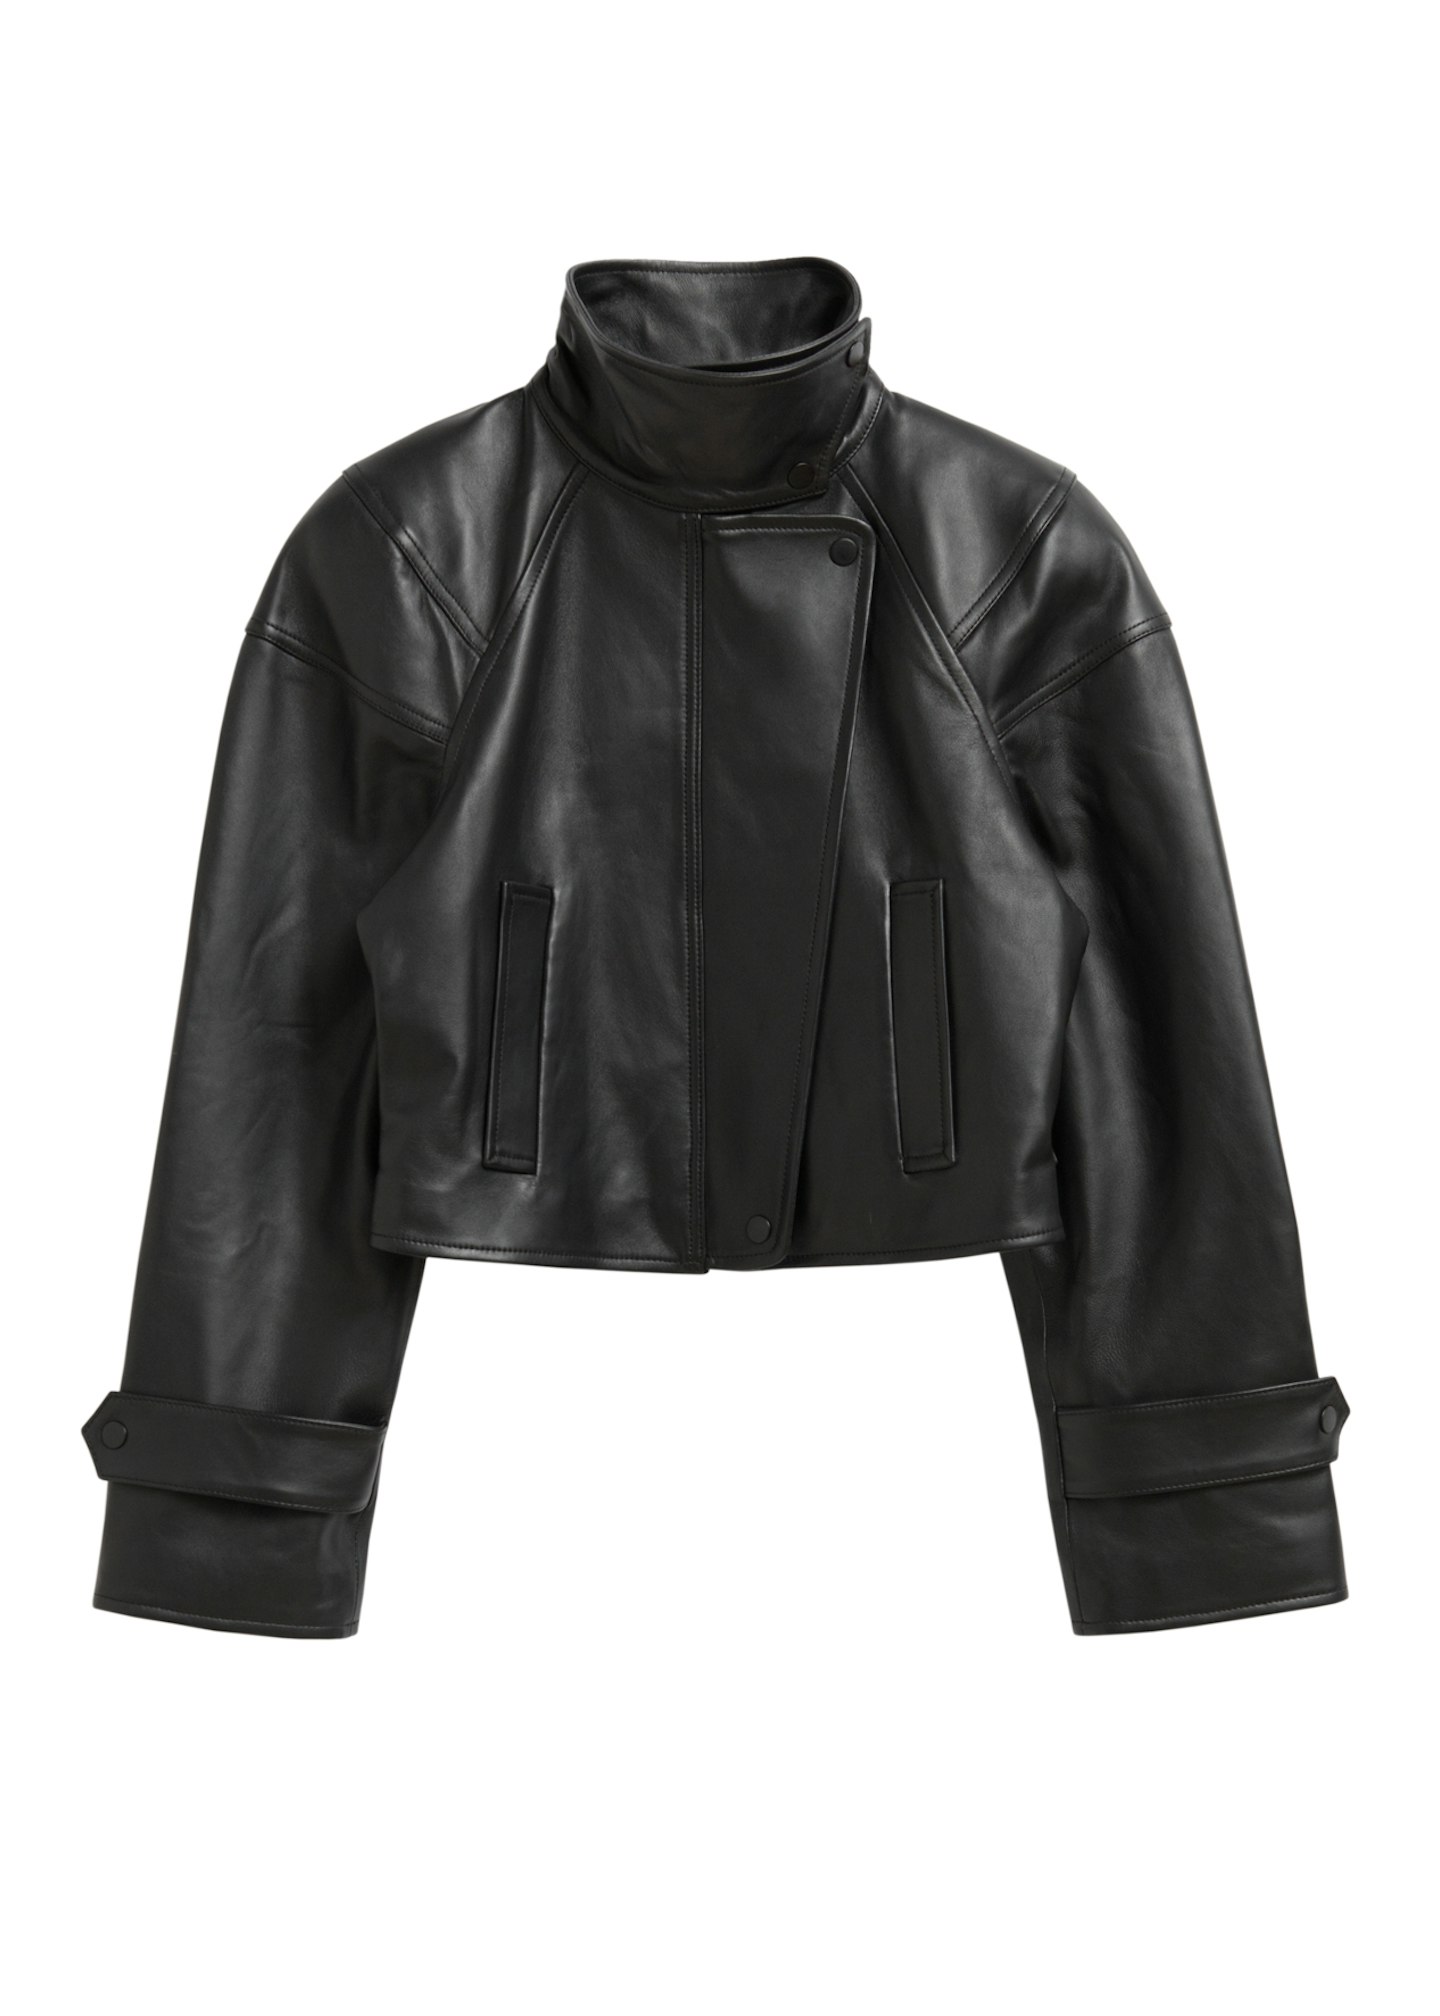 Black leather jacket and other stories lunchtime shop